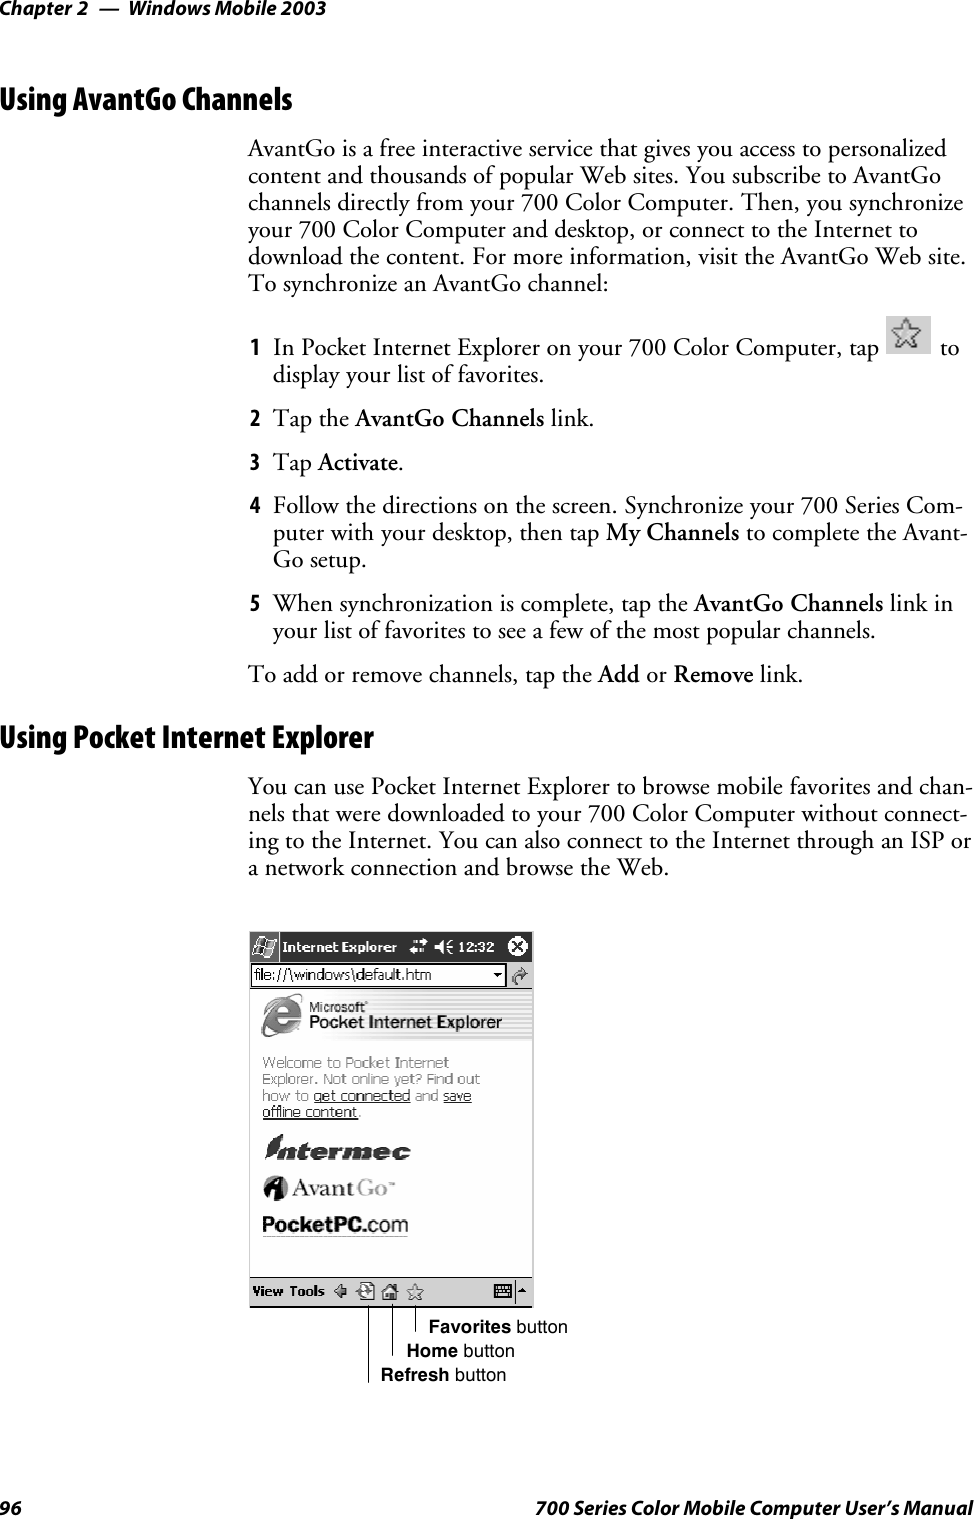 Windows Mobile 2003Chapter —296 700 Series Color Mobile Computer User’s ManualUsing AvantGo ChannelsAvantGo is a free interactive service that gives you access to personalizedcontent and thousands of popular Web sites. You subscribe to AvantGochannels directly from your 700 Color Computer. Then, you synchronizeyour 700 Color Computer and desktop, or connect to the Internet todownload the content. For more information, visit the AvantGo Web site.To synchronize an AvantGo channel:1In Pocket Internet Explorer on your 700 Color Computer, tap todisplay your list of favorites.2Tap the AvantGo Channels link.3Tap Activate.4Follow the directions on the screen. Synchronize your 700 Series Com-puterwithyourdesktop,thentapMy Channels to complete the Avant-Go setup.5When synchronization is complete, tap the AvantGo Channels link inyour list of favorites to see a few of the most popular channels.To add or remove channels, tap the Add or Remove link.Using Pocket Internet ExplorerYoucanusePocketInternetExplorertobrowsemobilefavoritesandchan-nels that were downloaded to your 700 Color Computer without connect-ing to the Internet. You can also connect to the Internet through an ISP ora network connection and browse the Web.Favorites buttonHome buttonRefresh button